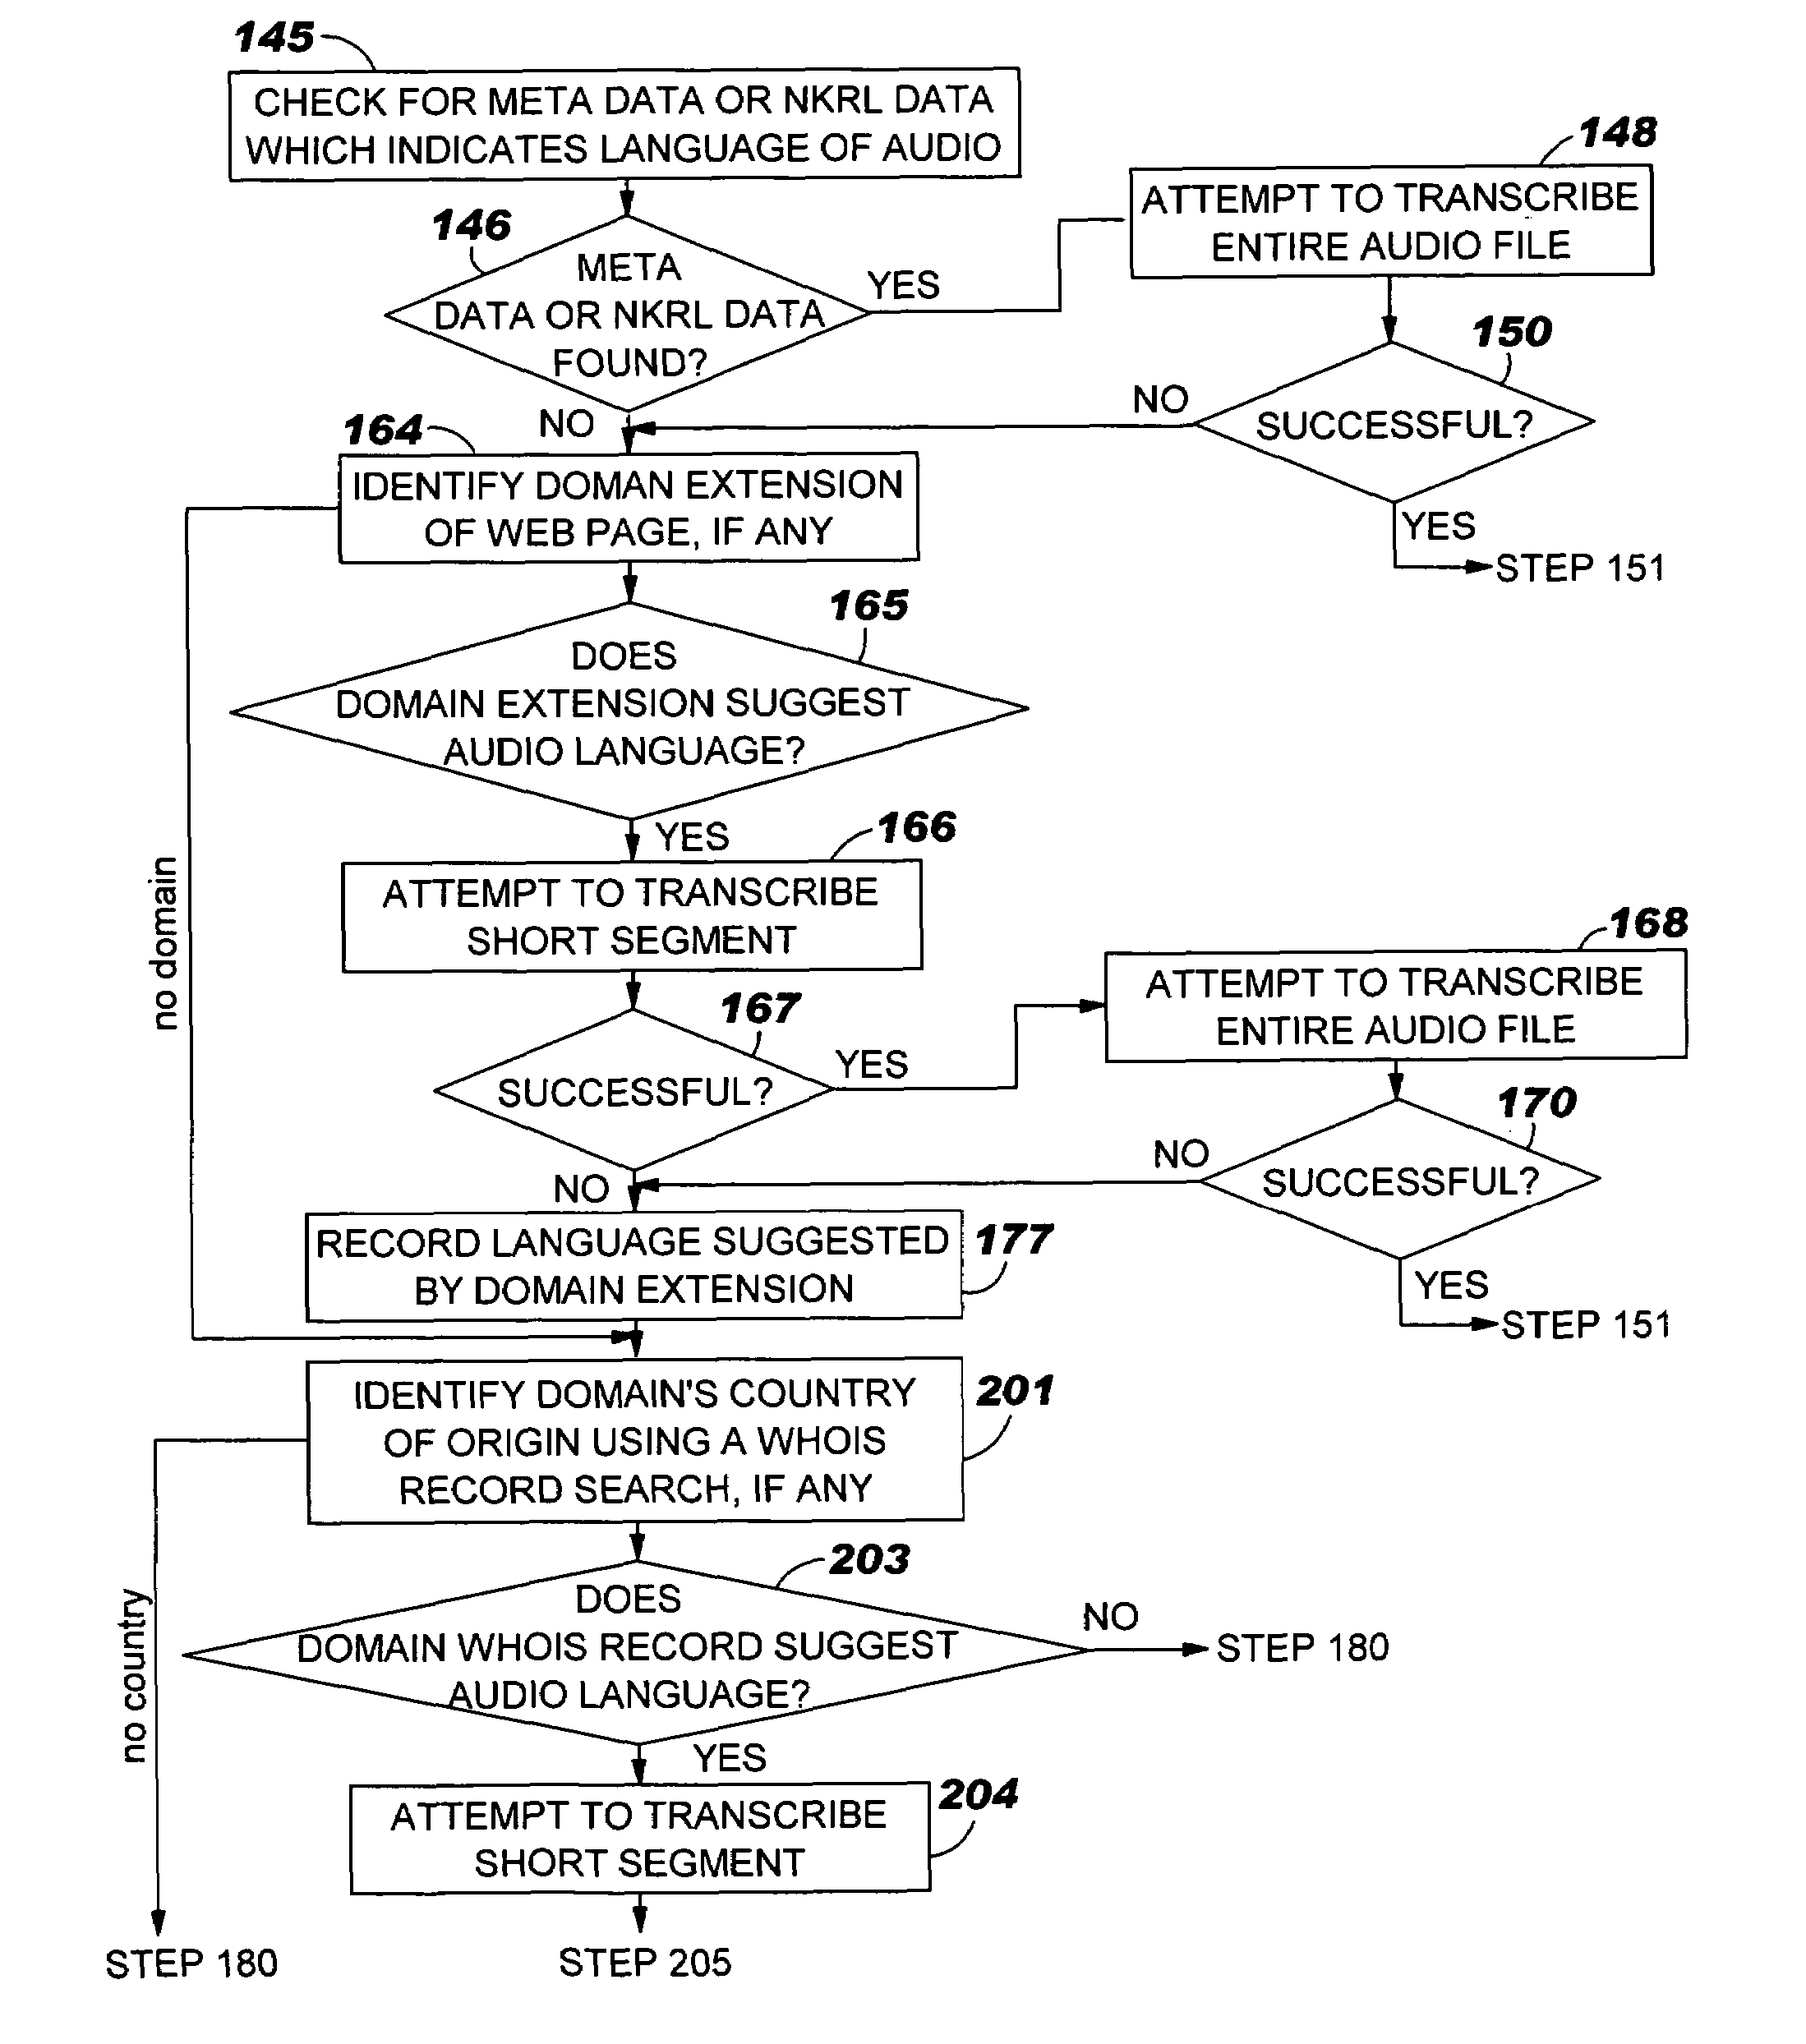 System and method for transcribing audio files of various languages